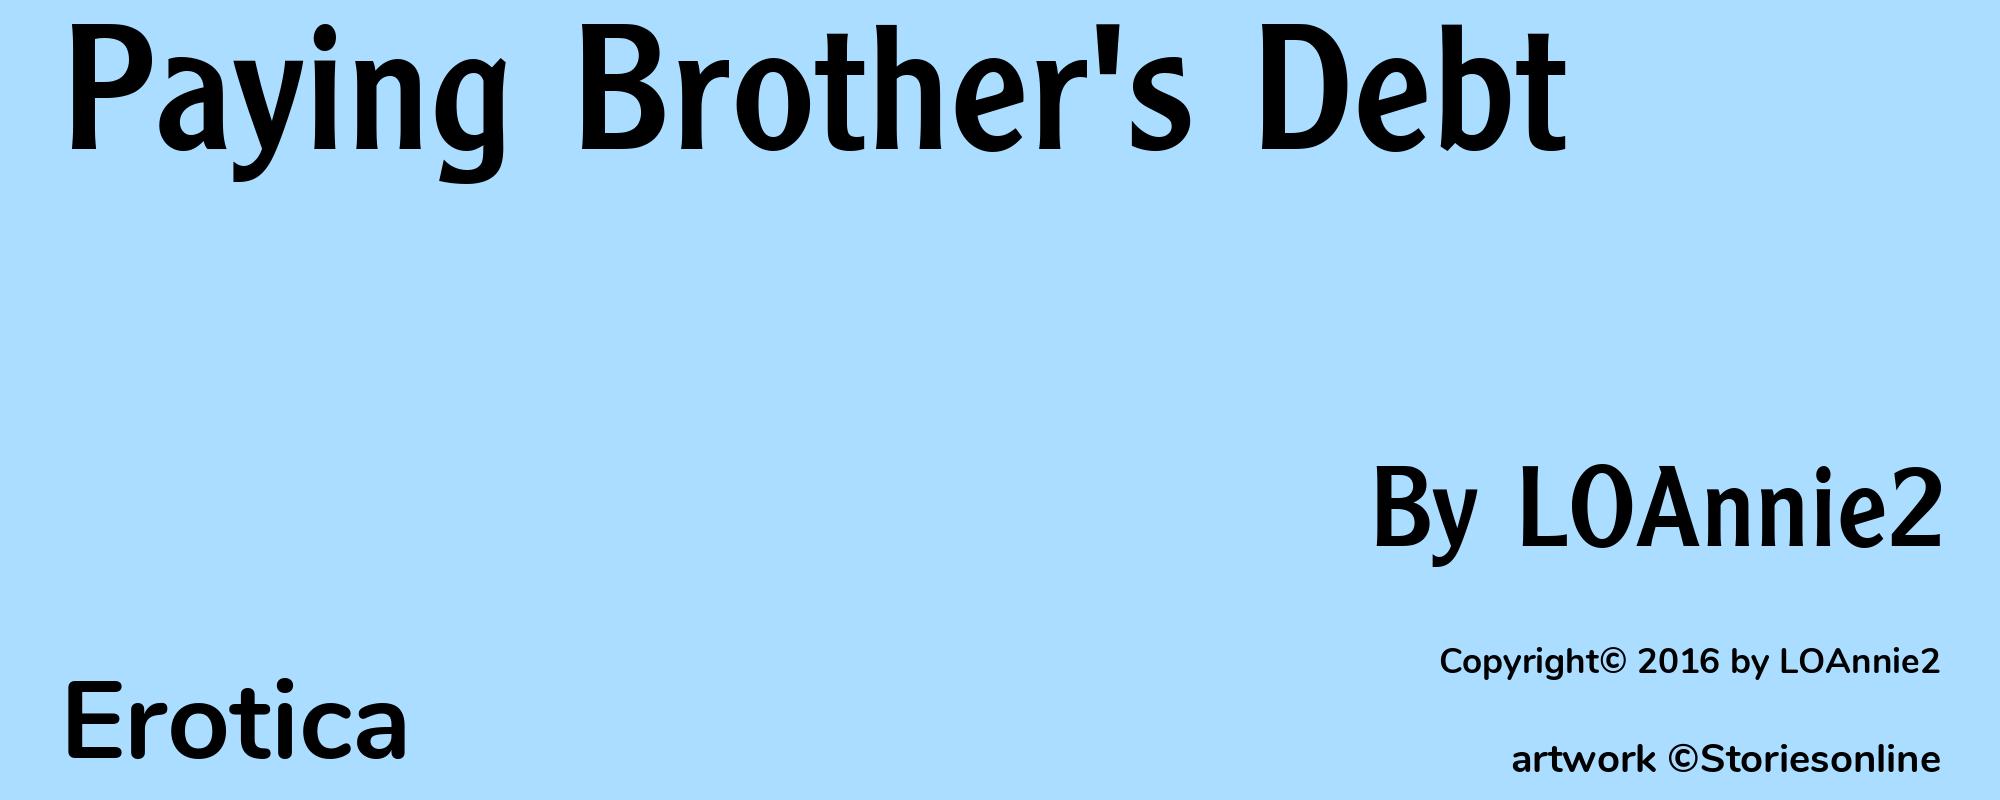 Paying Brother's Debt - Cover